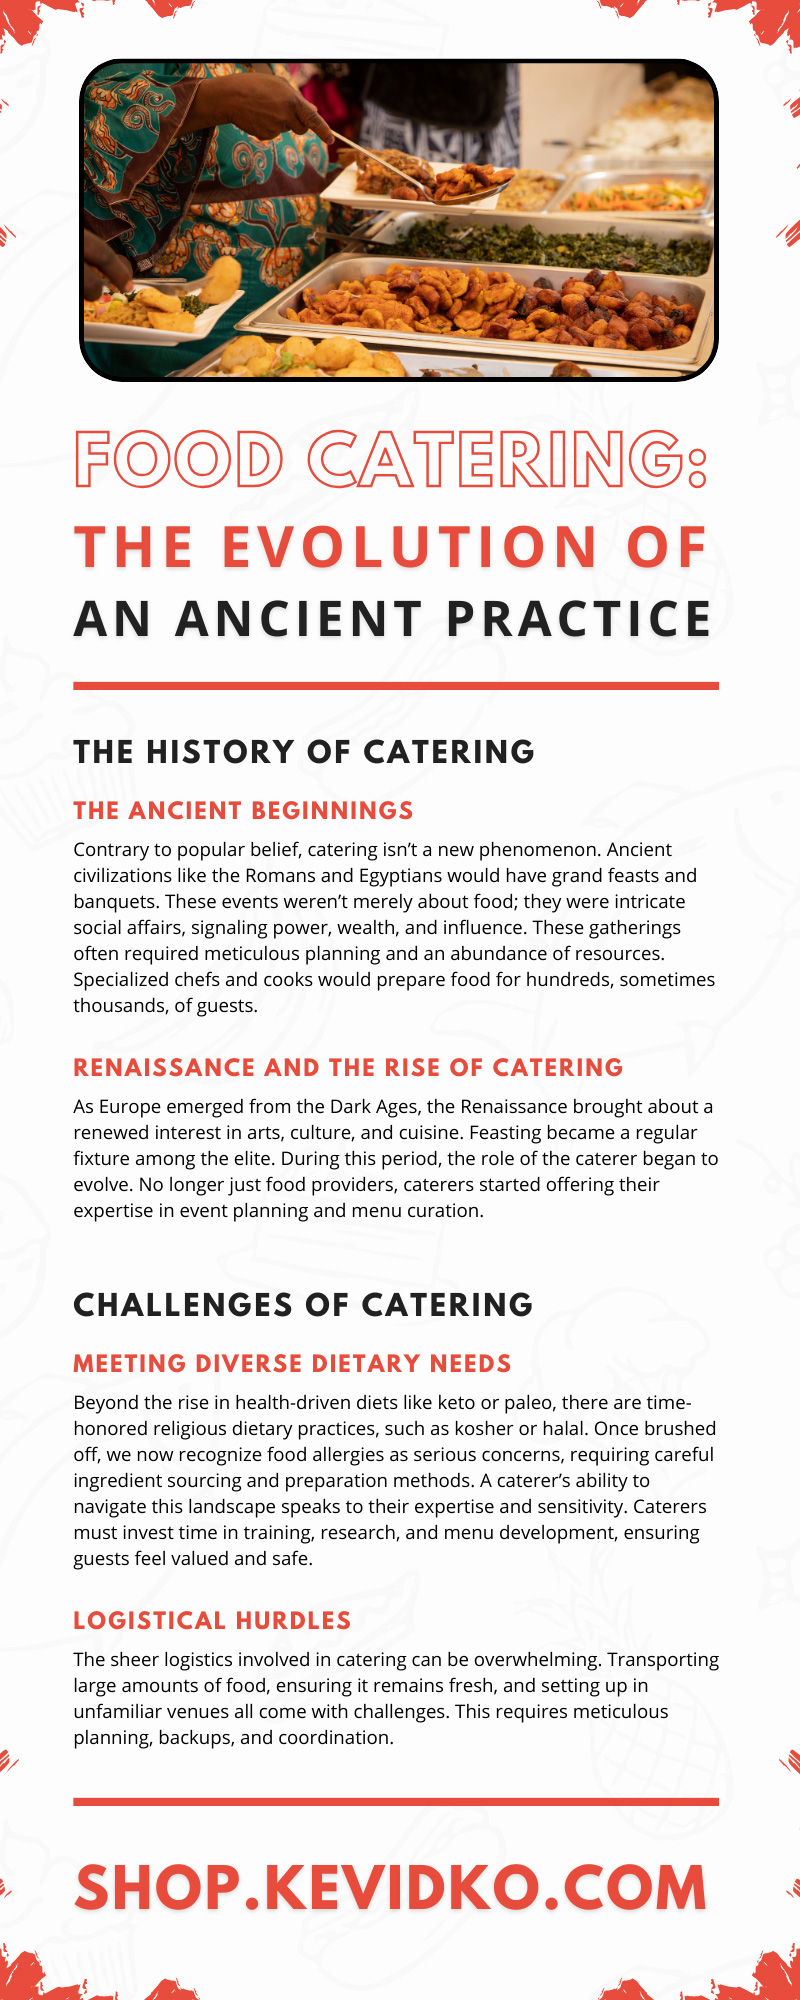 Food Catering: The Evolution of an Ancient Practice